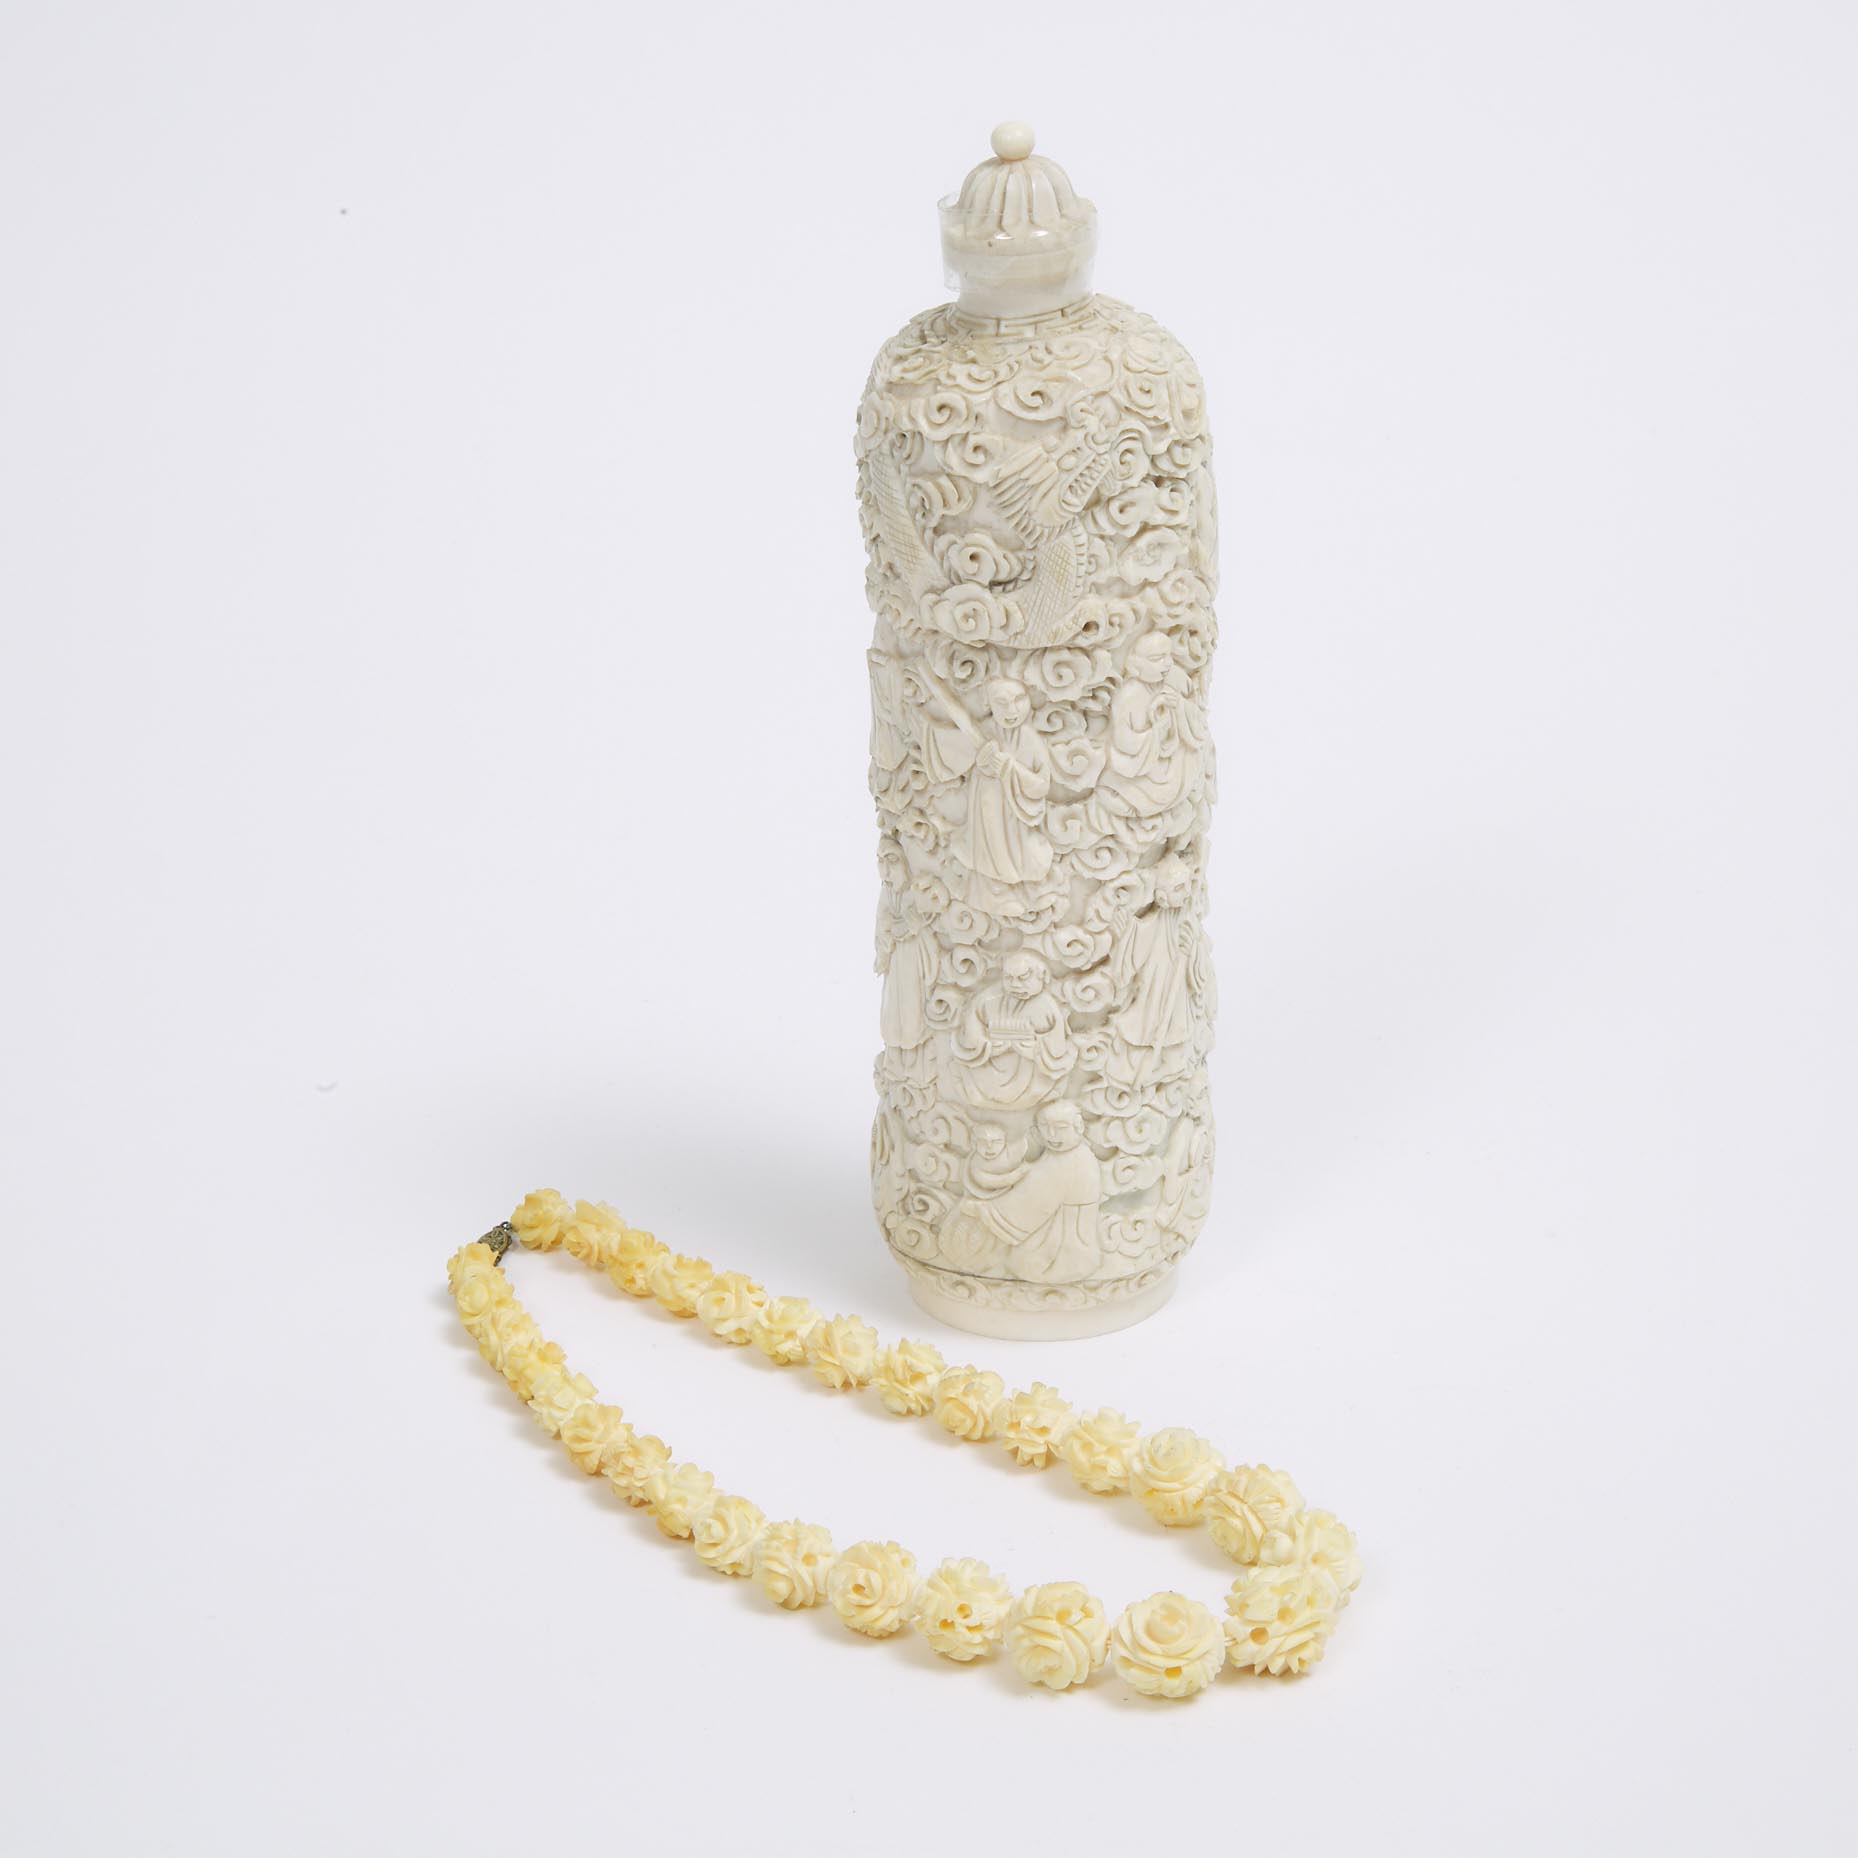 A Large Ivory Snuff Bottle, together with an Ivory Bead Necklace